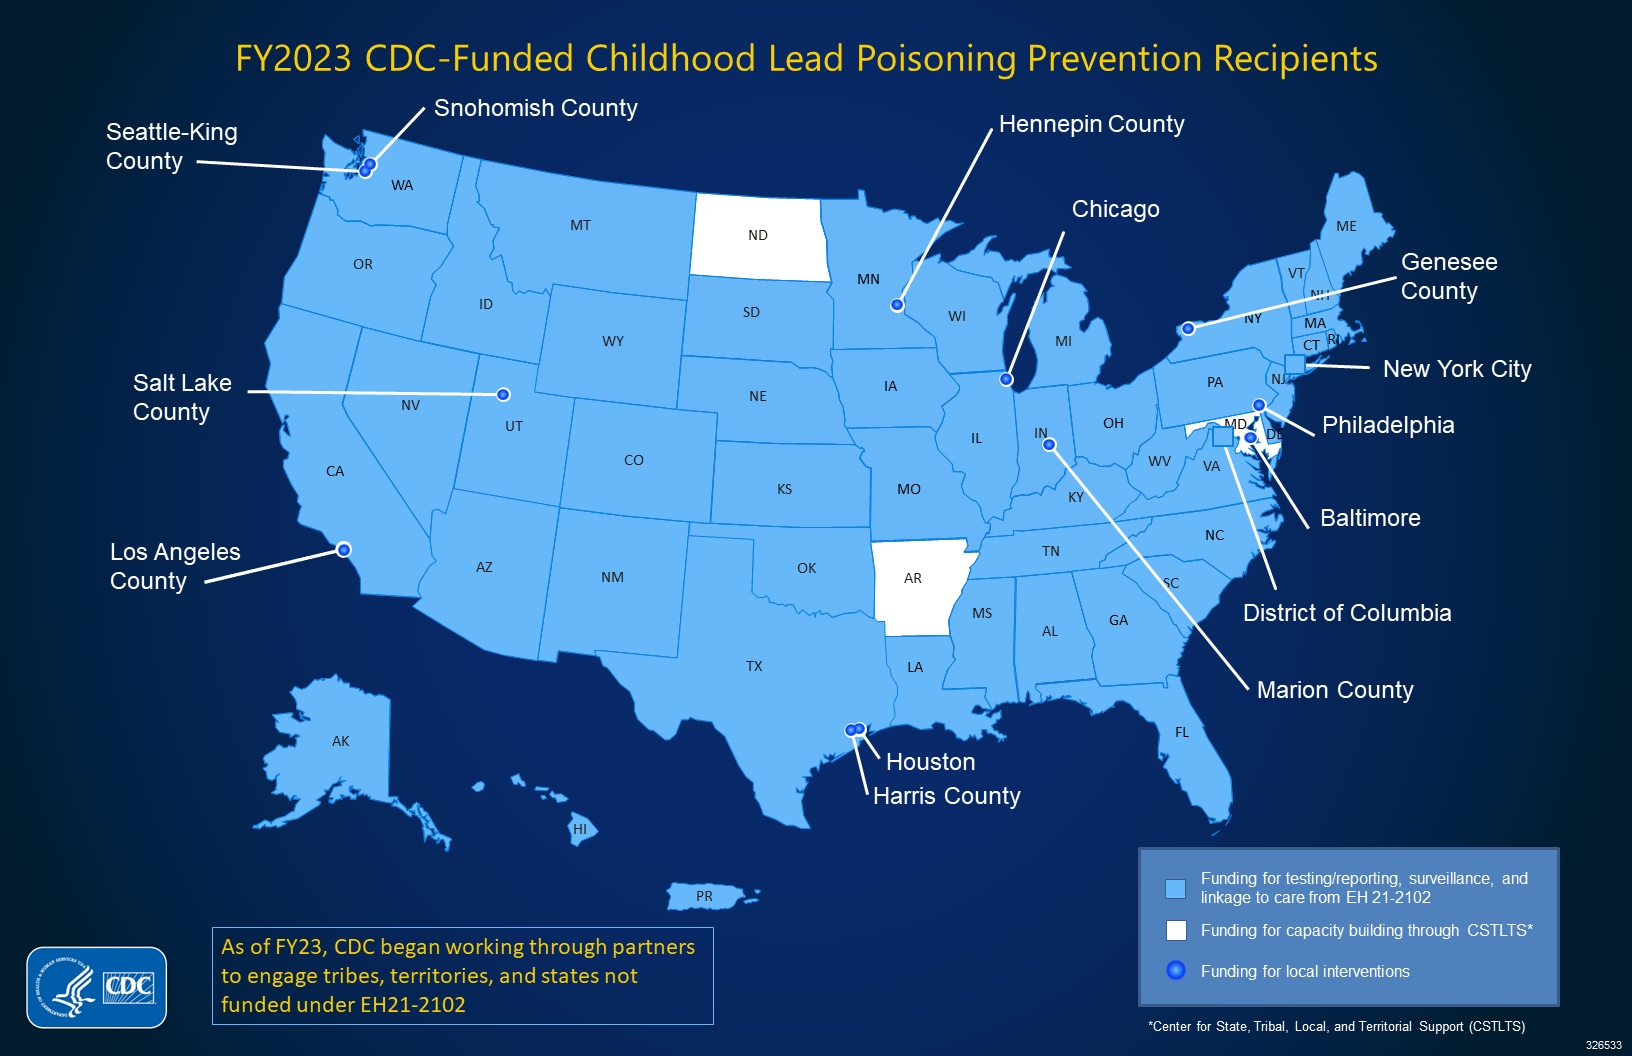 Map of CDC-funded childhood lead poisoning prevention recipients.